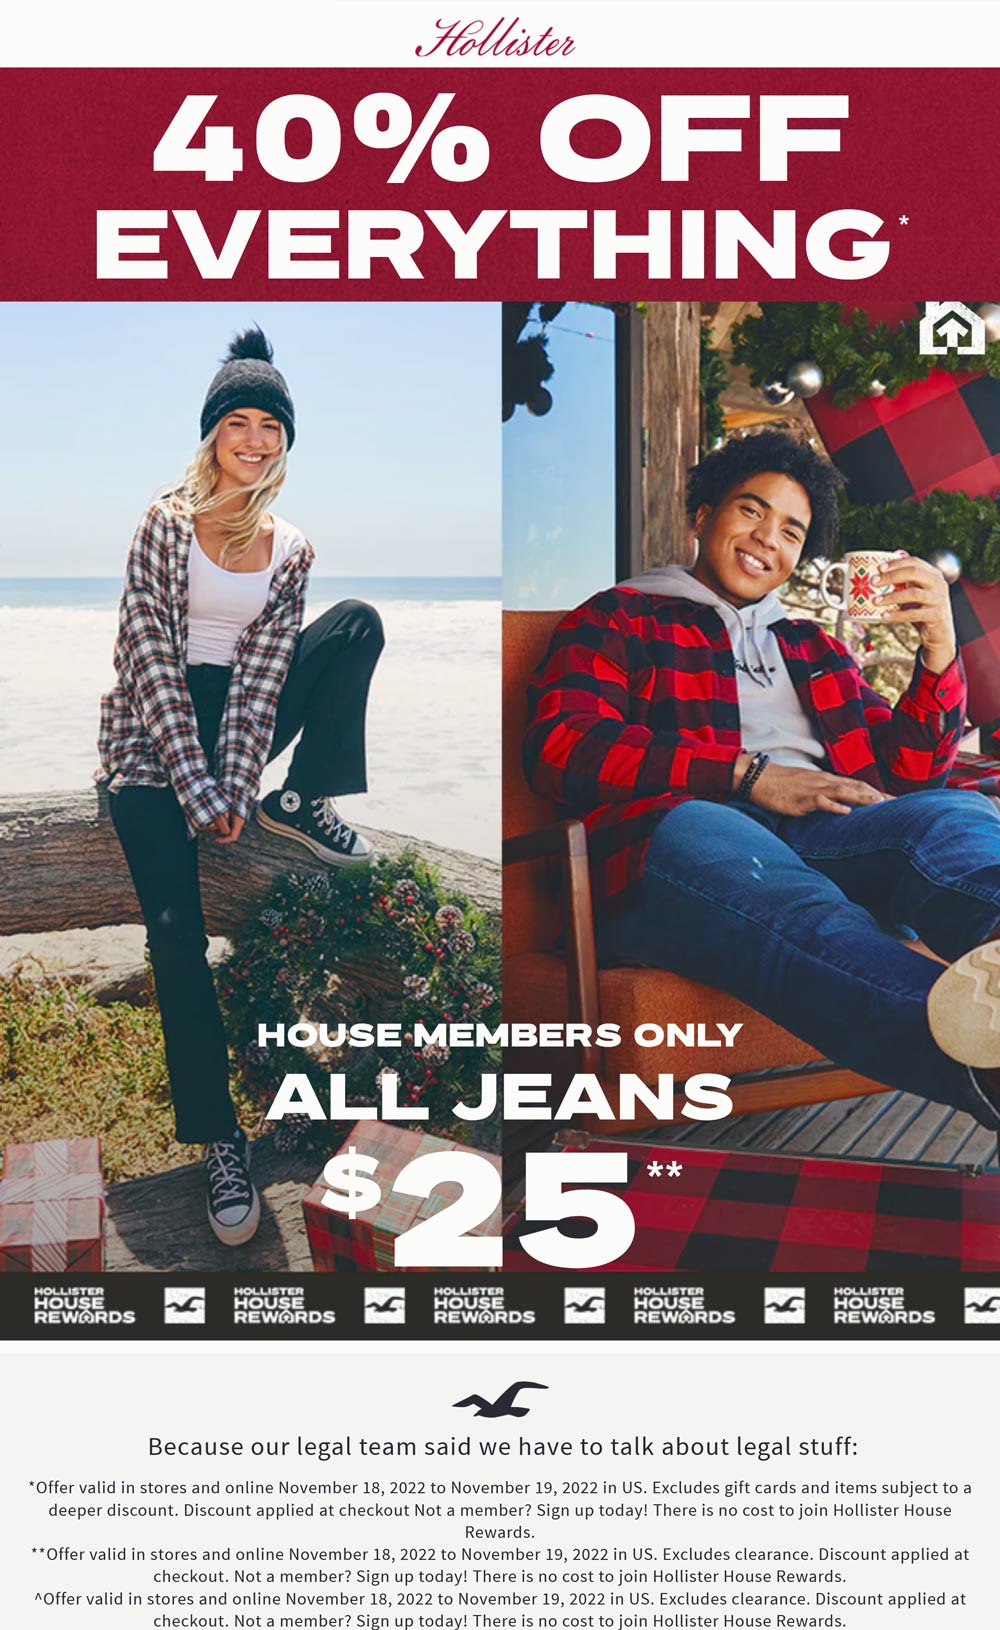 Hollister stores Coupon  40% off everything & $25 jeans today at Hollister #hollister 